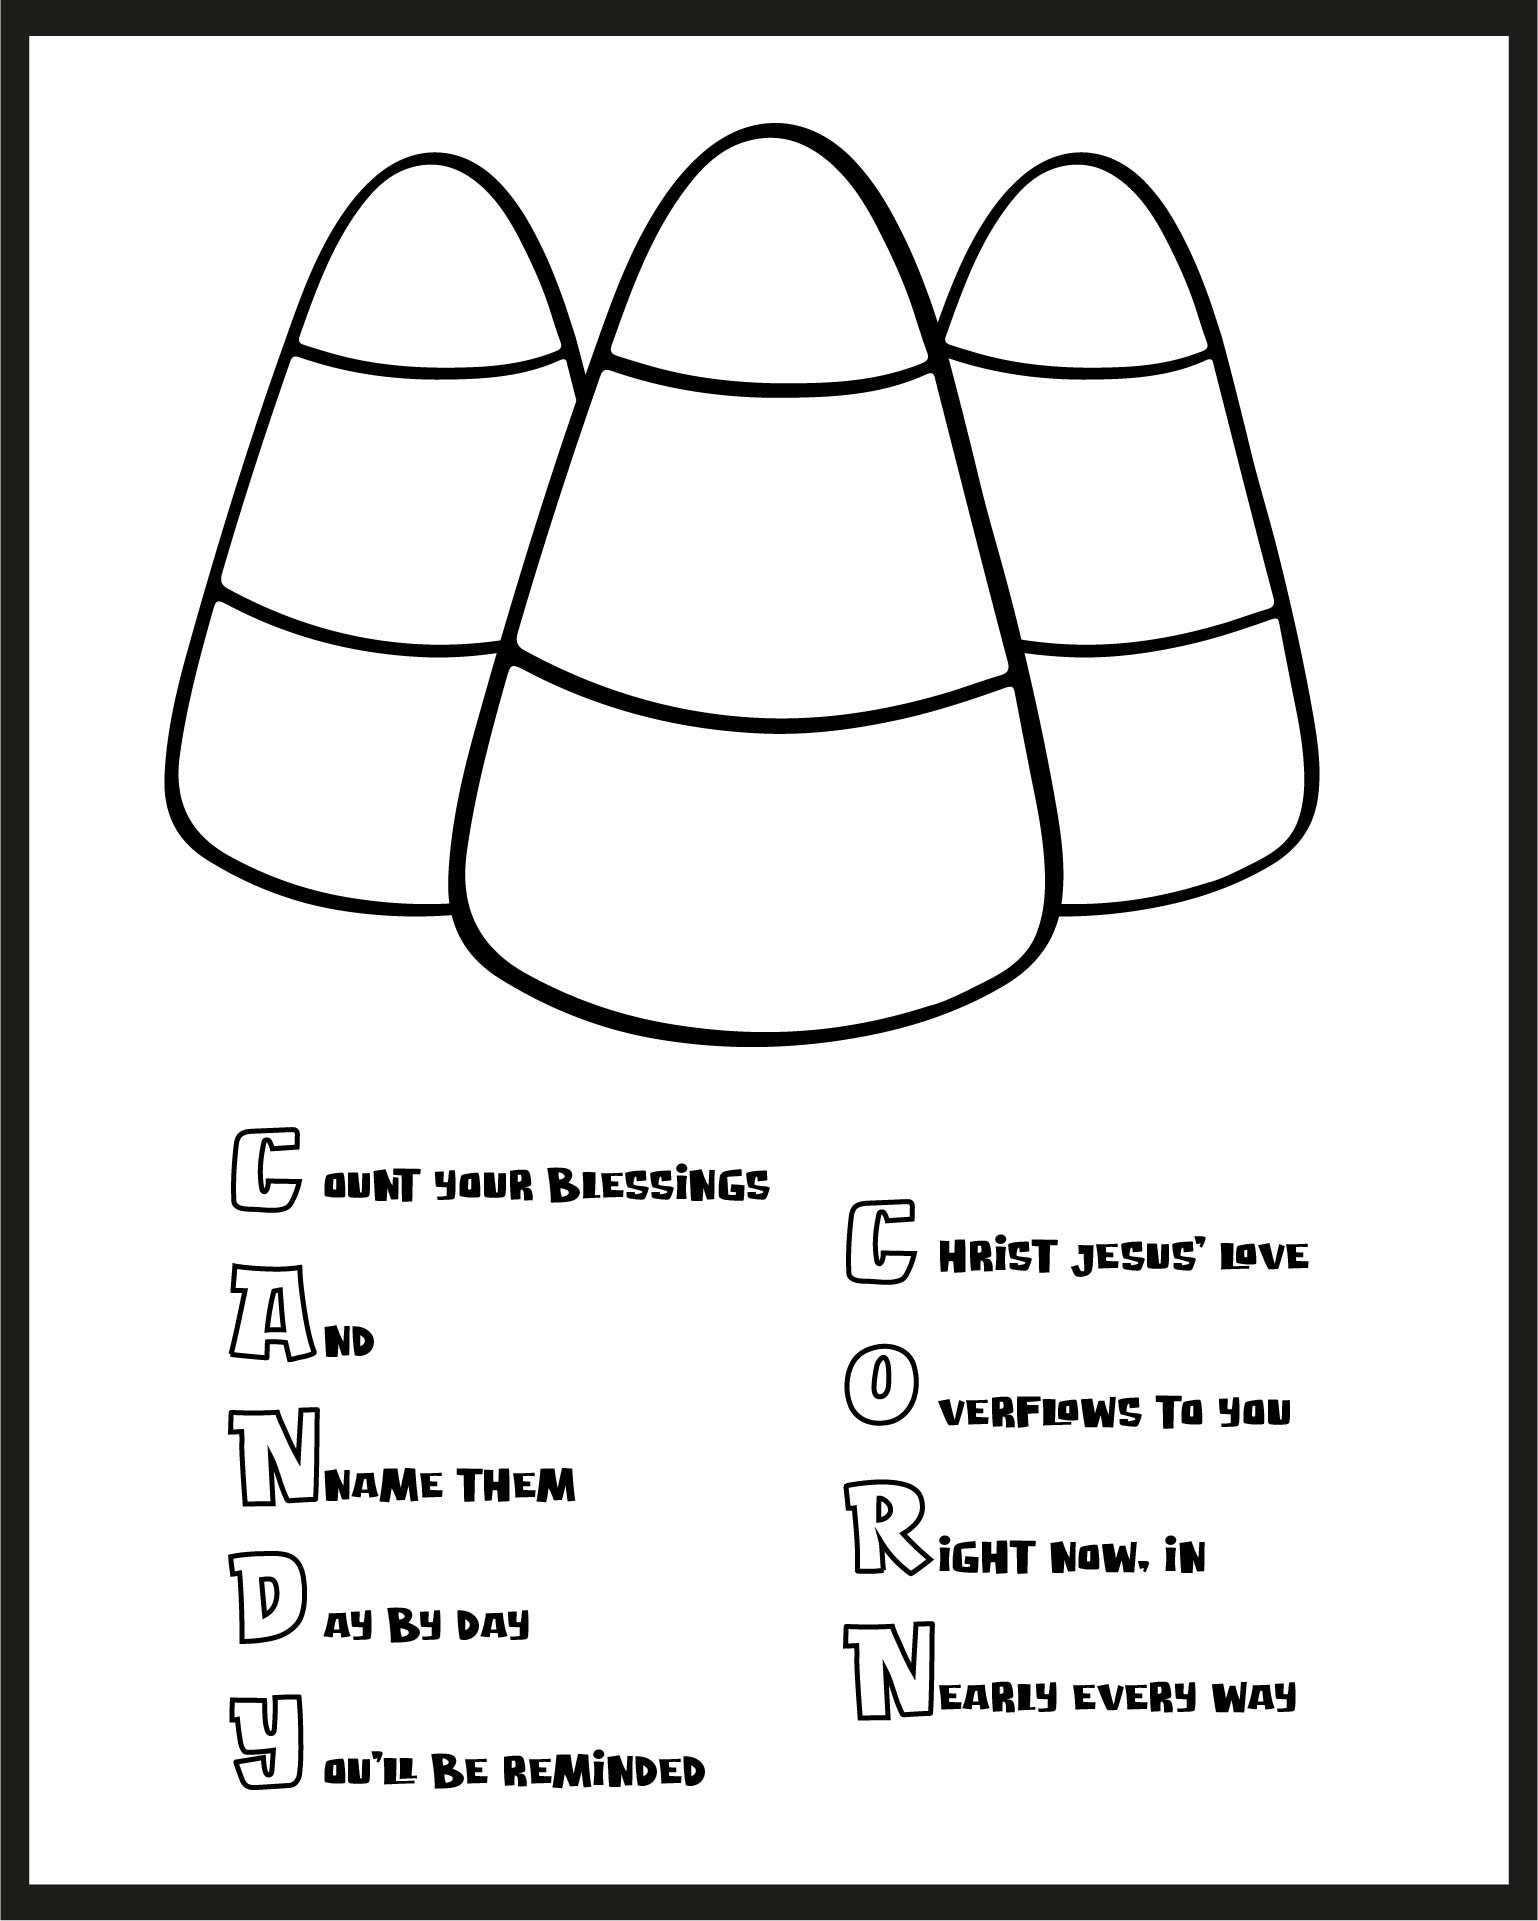 Christian Halloween Candy Corn Printable Coloring Pages For Kids